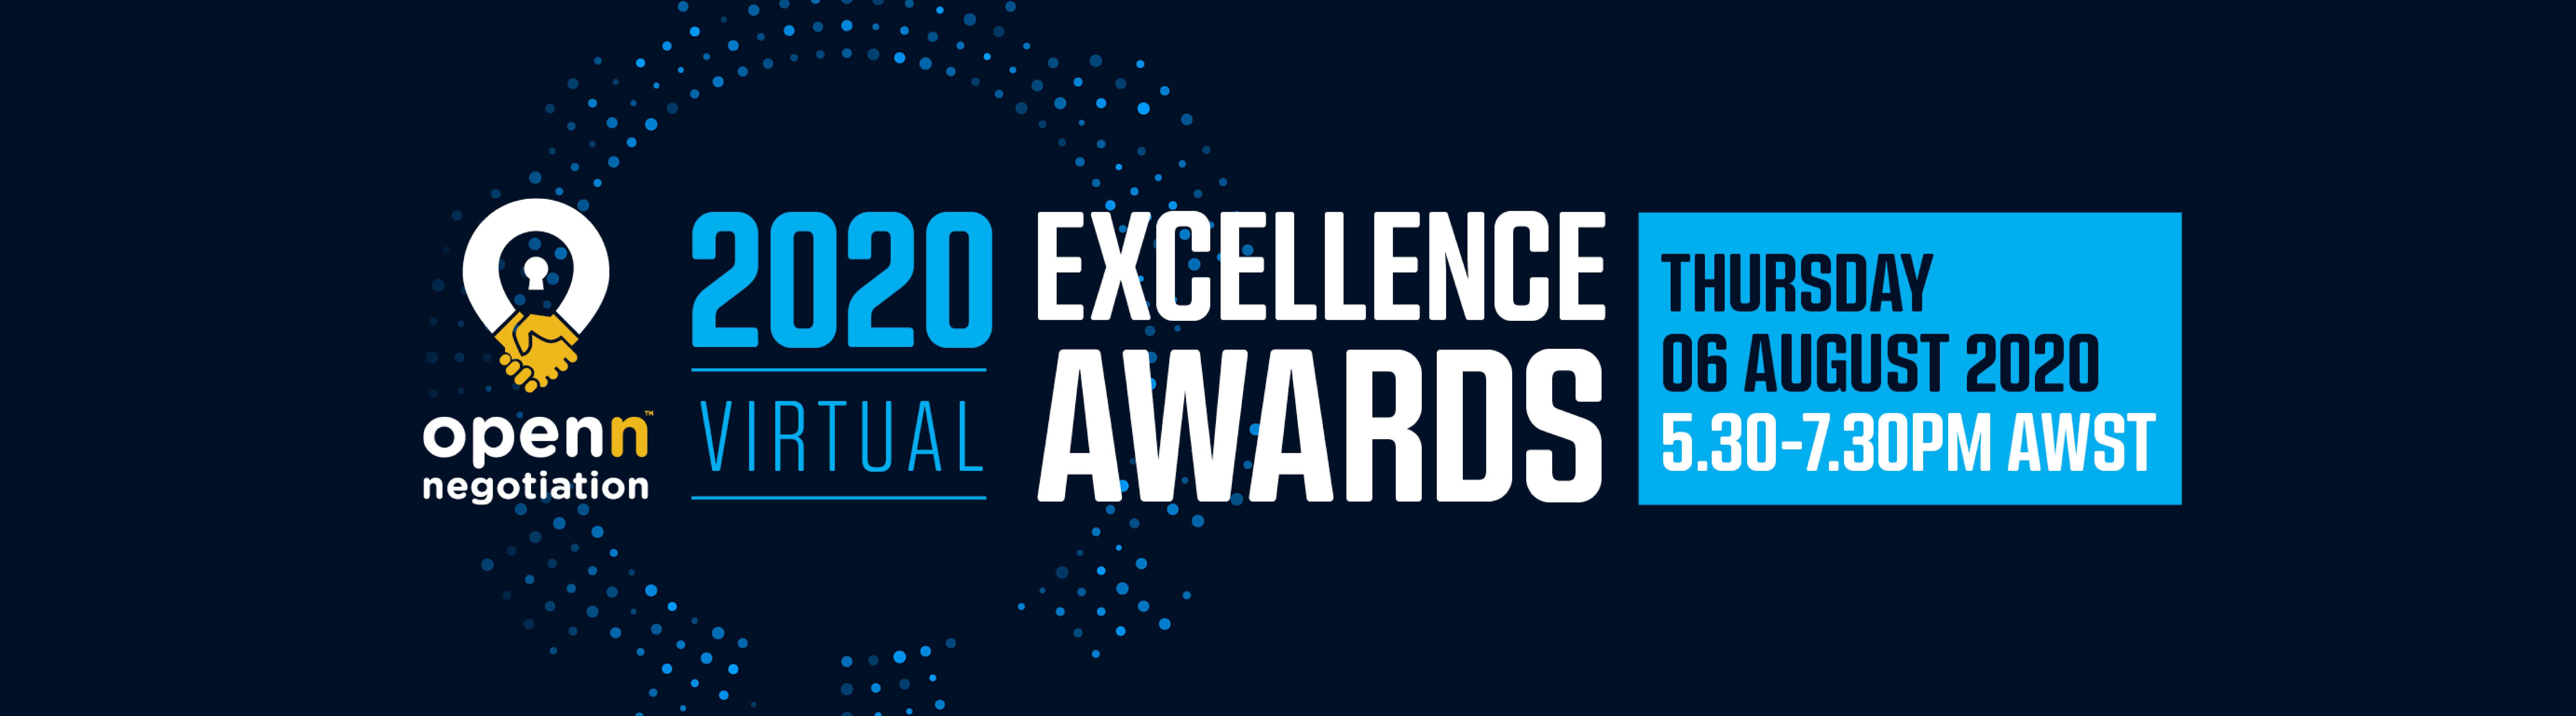 Excellence-awards-banner_web_4